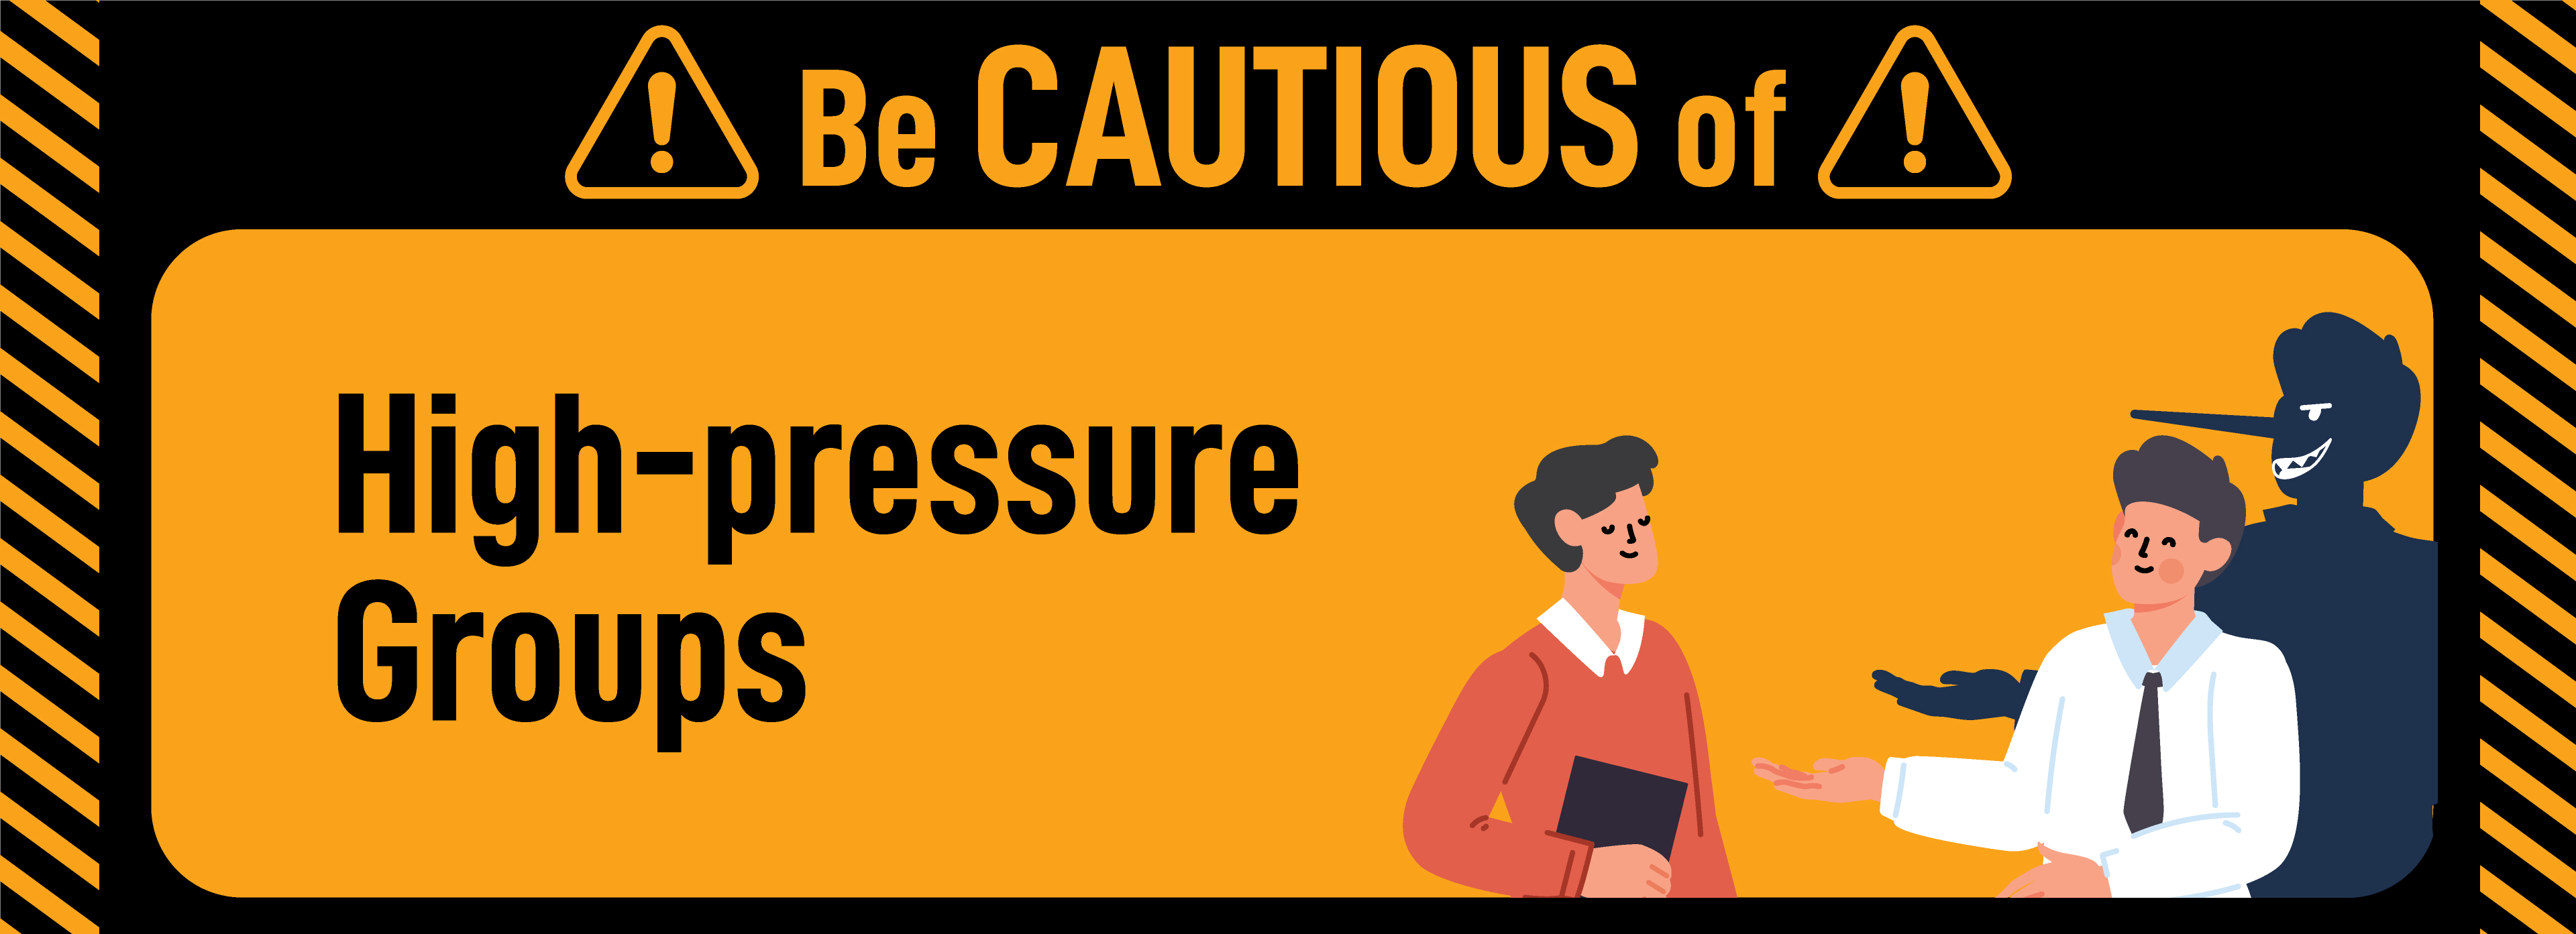 Be-Cautions-of-High-pressure-Groups-only_UPDATED